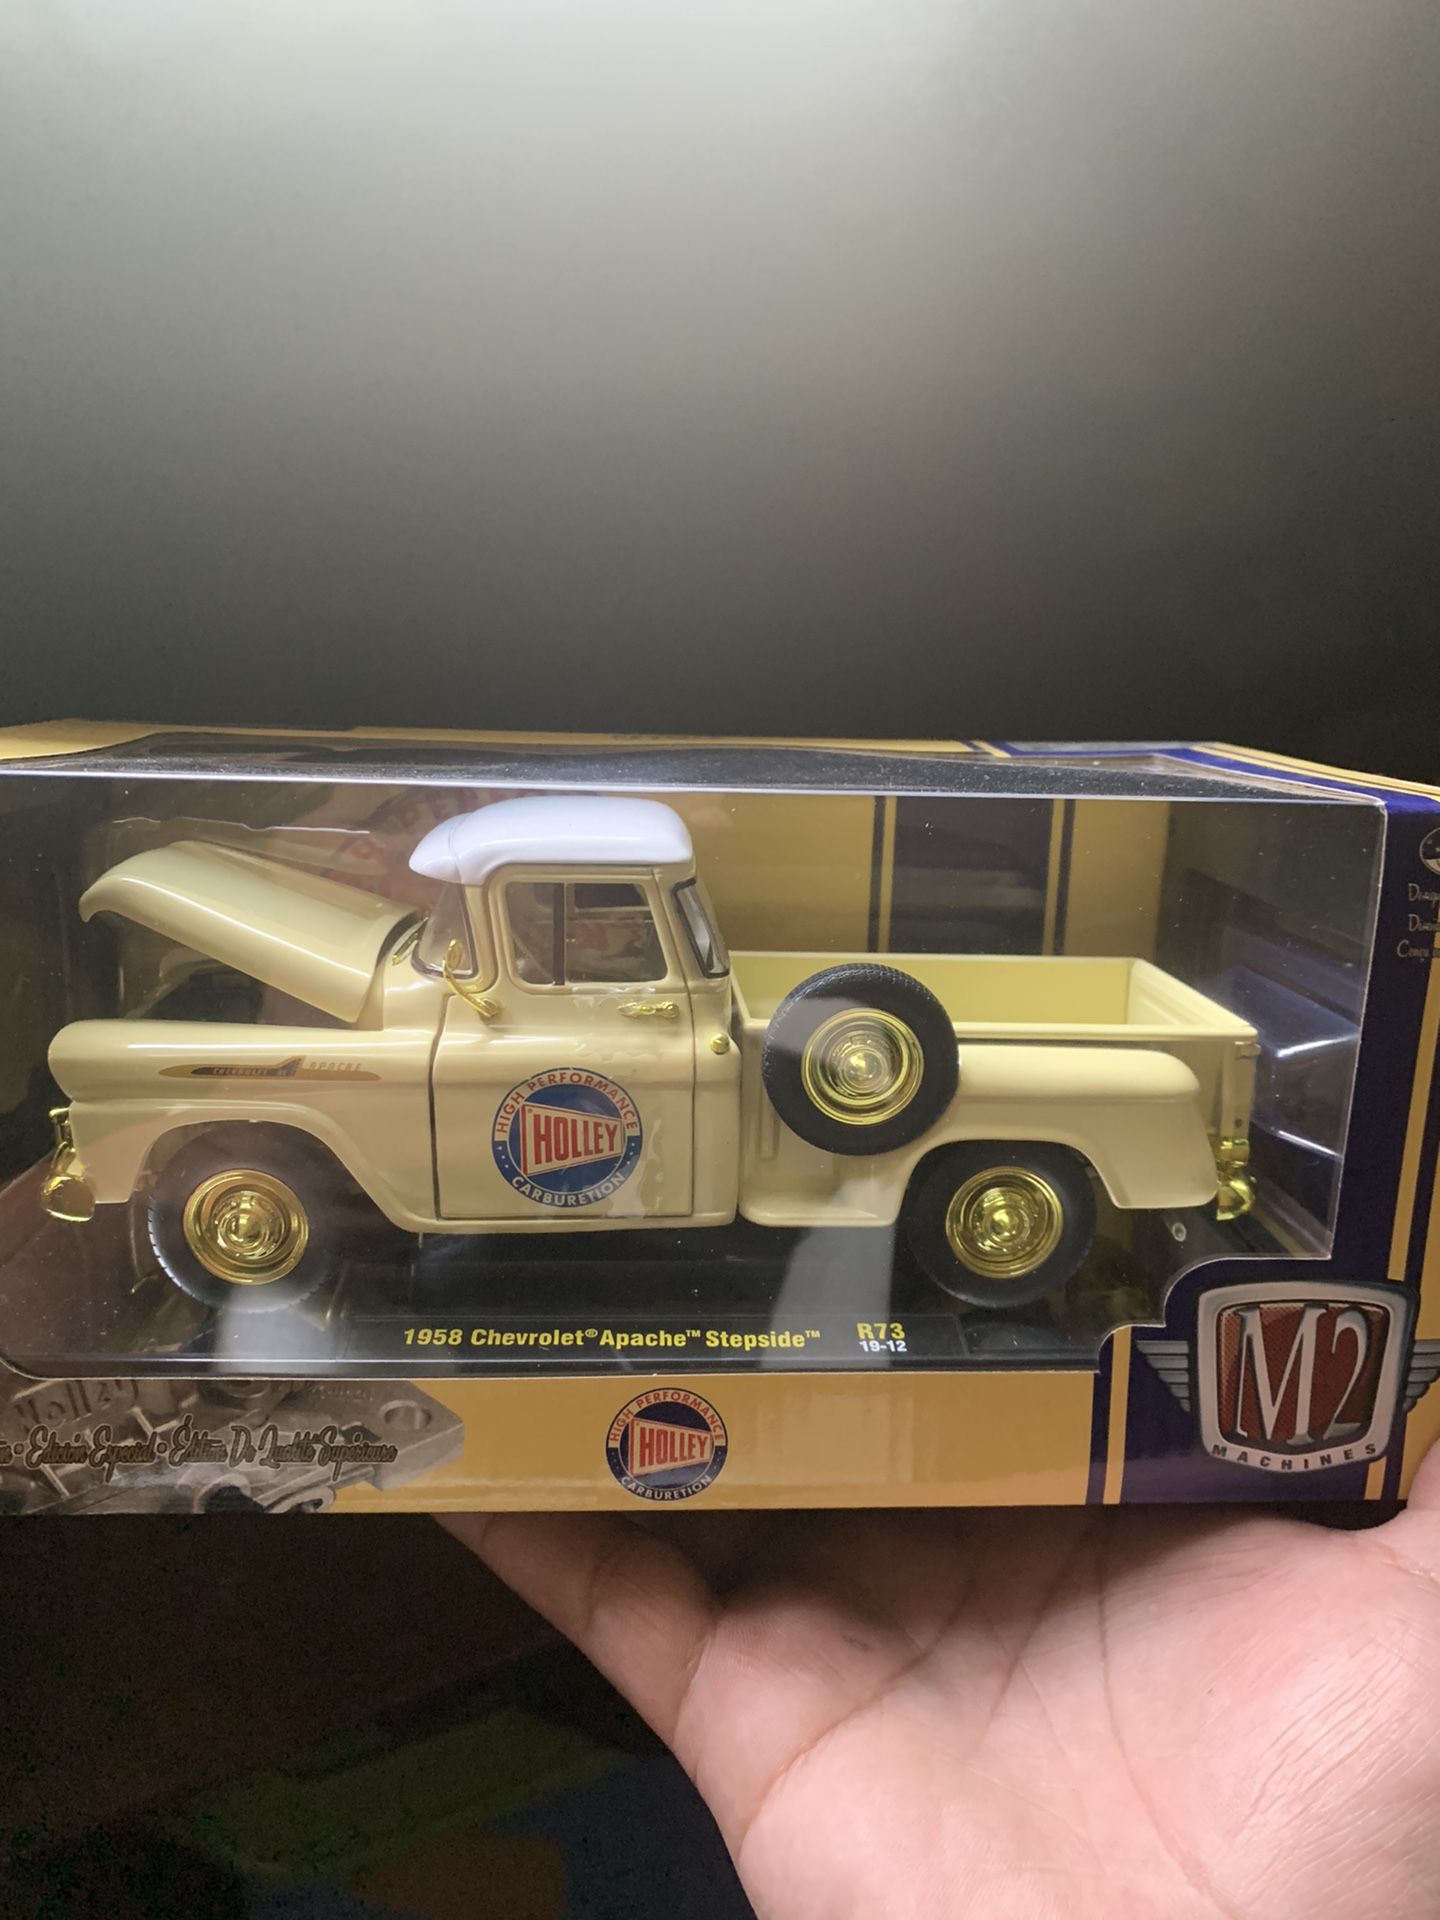 1958 Chevrolet stepside apache R73 gold chase M2 Holley 1/24 1:24 scale